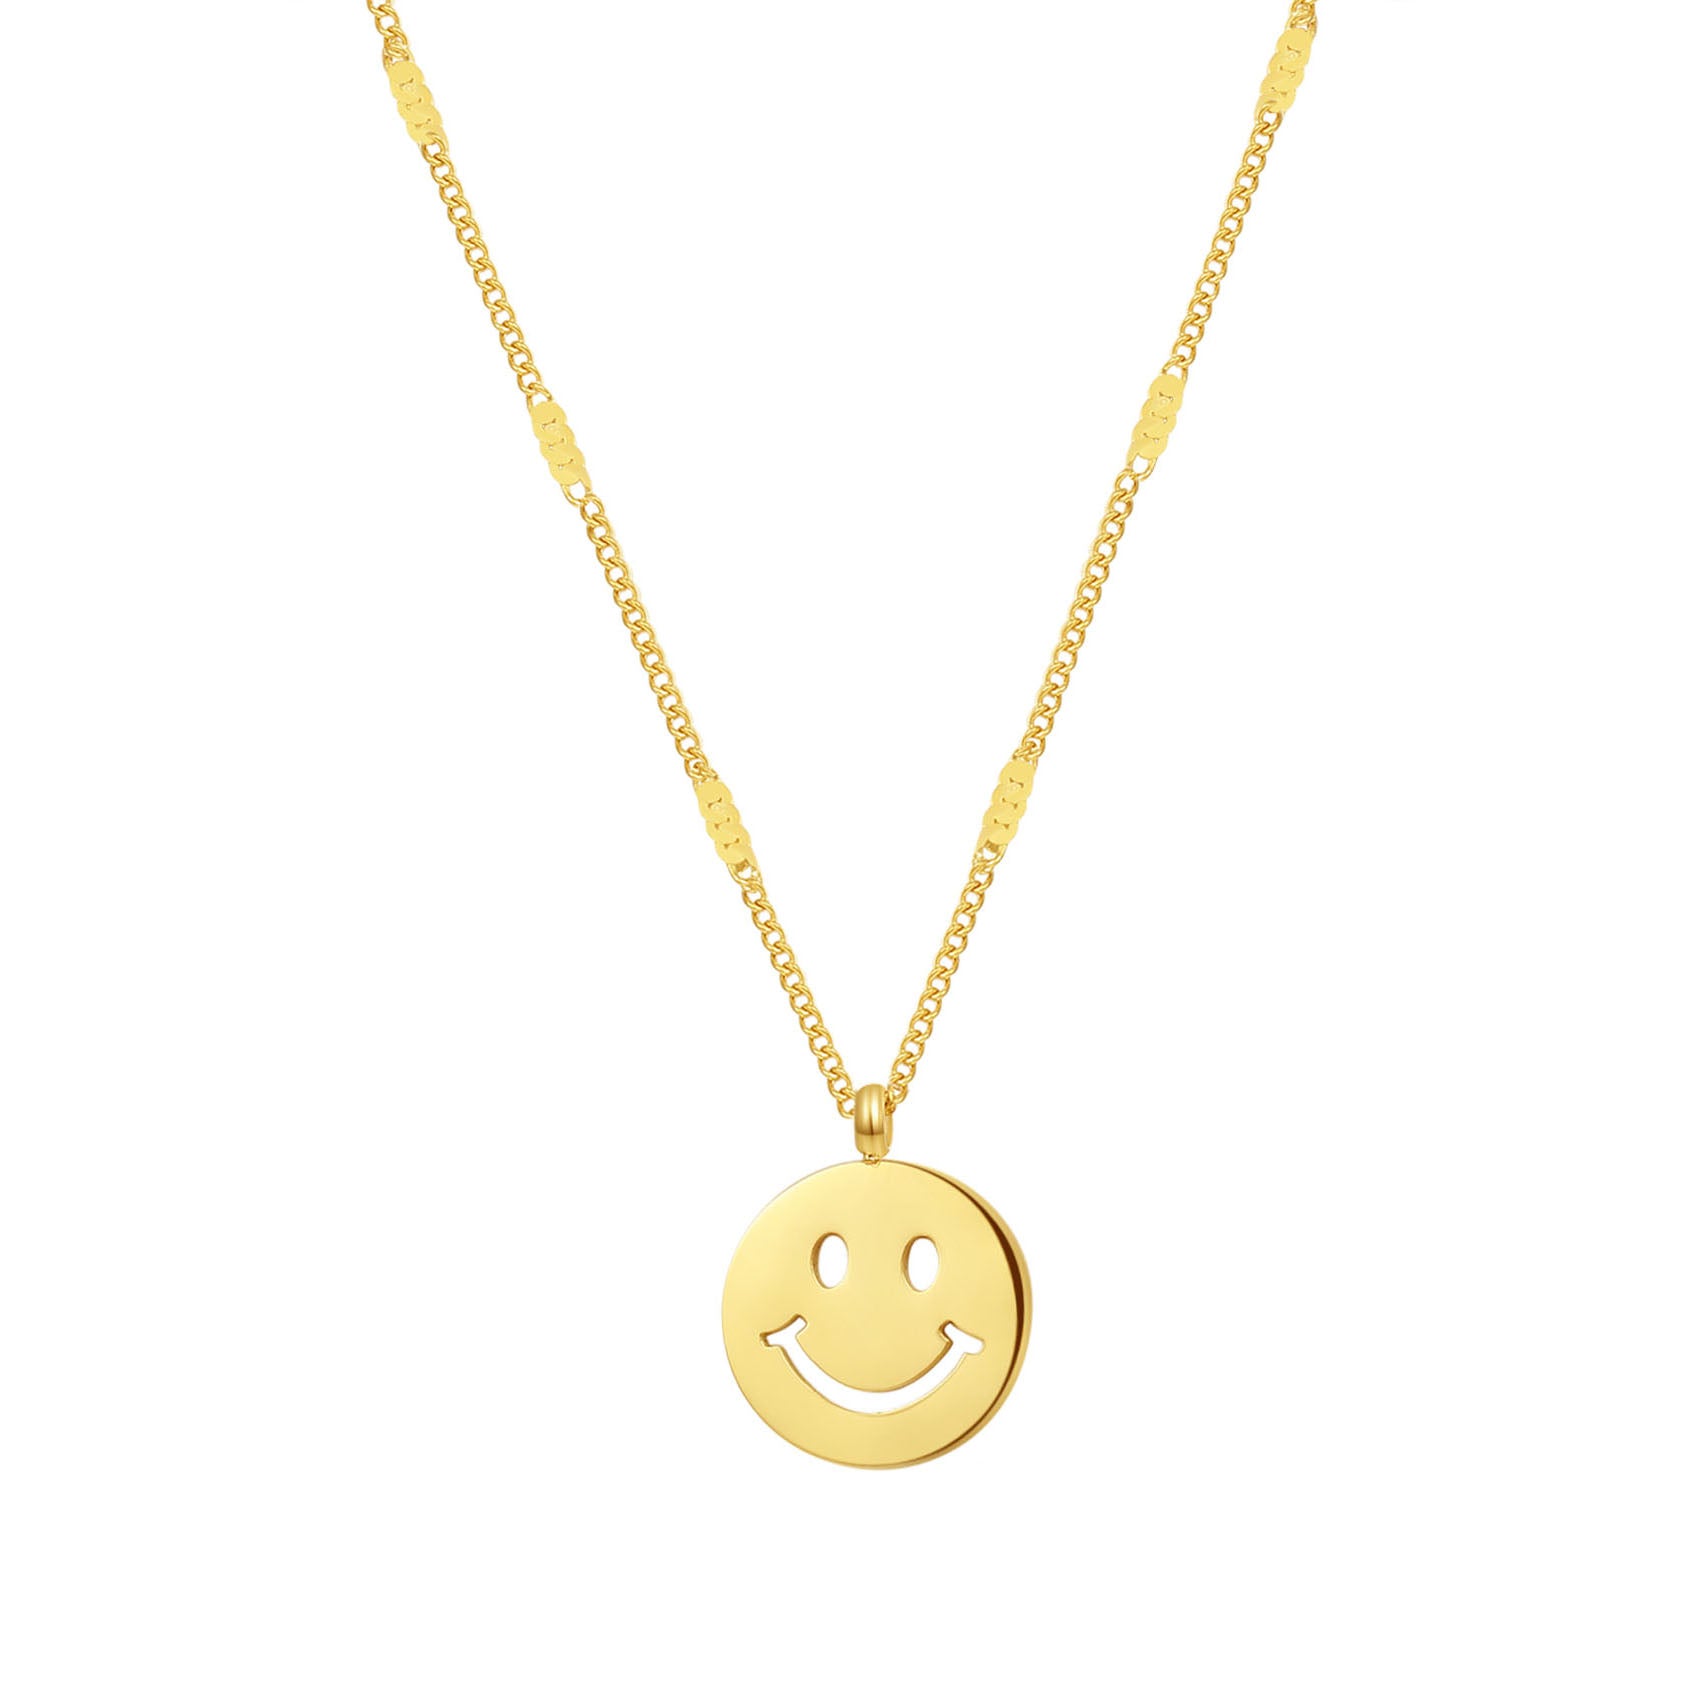 Kette Smiley Gesicht Anhänger Happiness Gold Hey in – Sterlingsilber